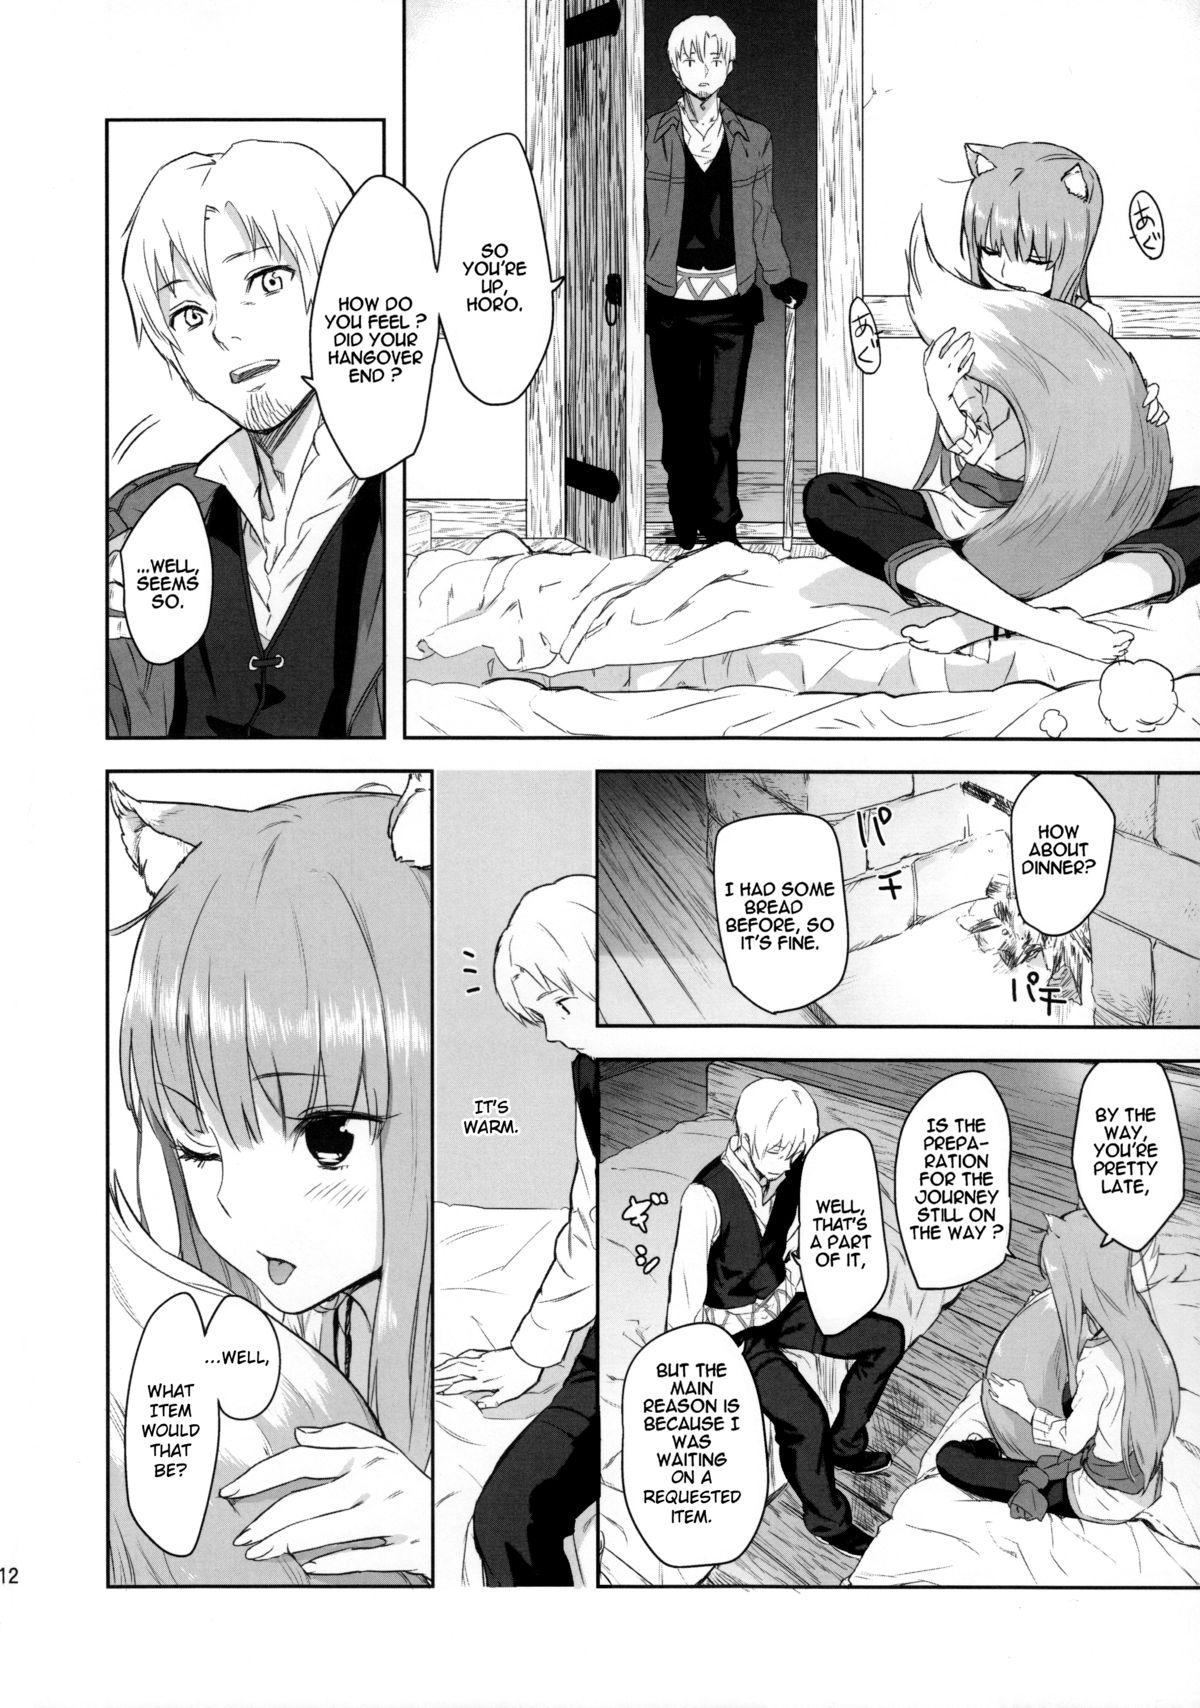 Boobies Harvest II - Spice and wolf Shorts - Page 12